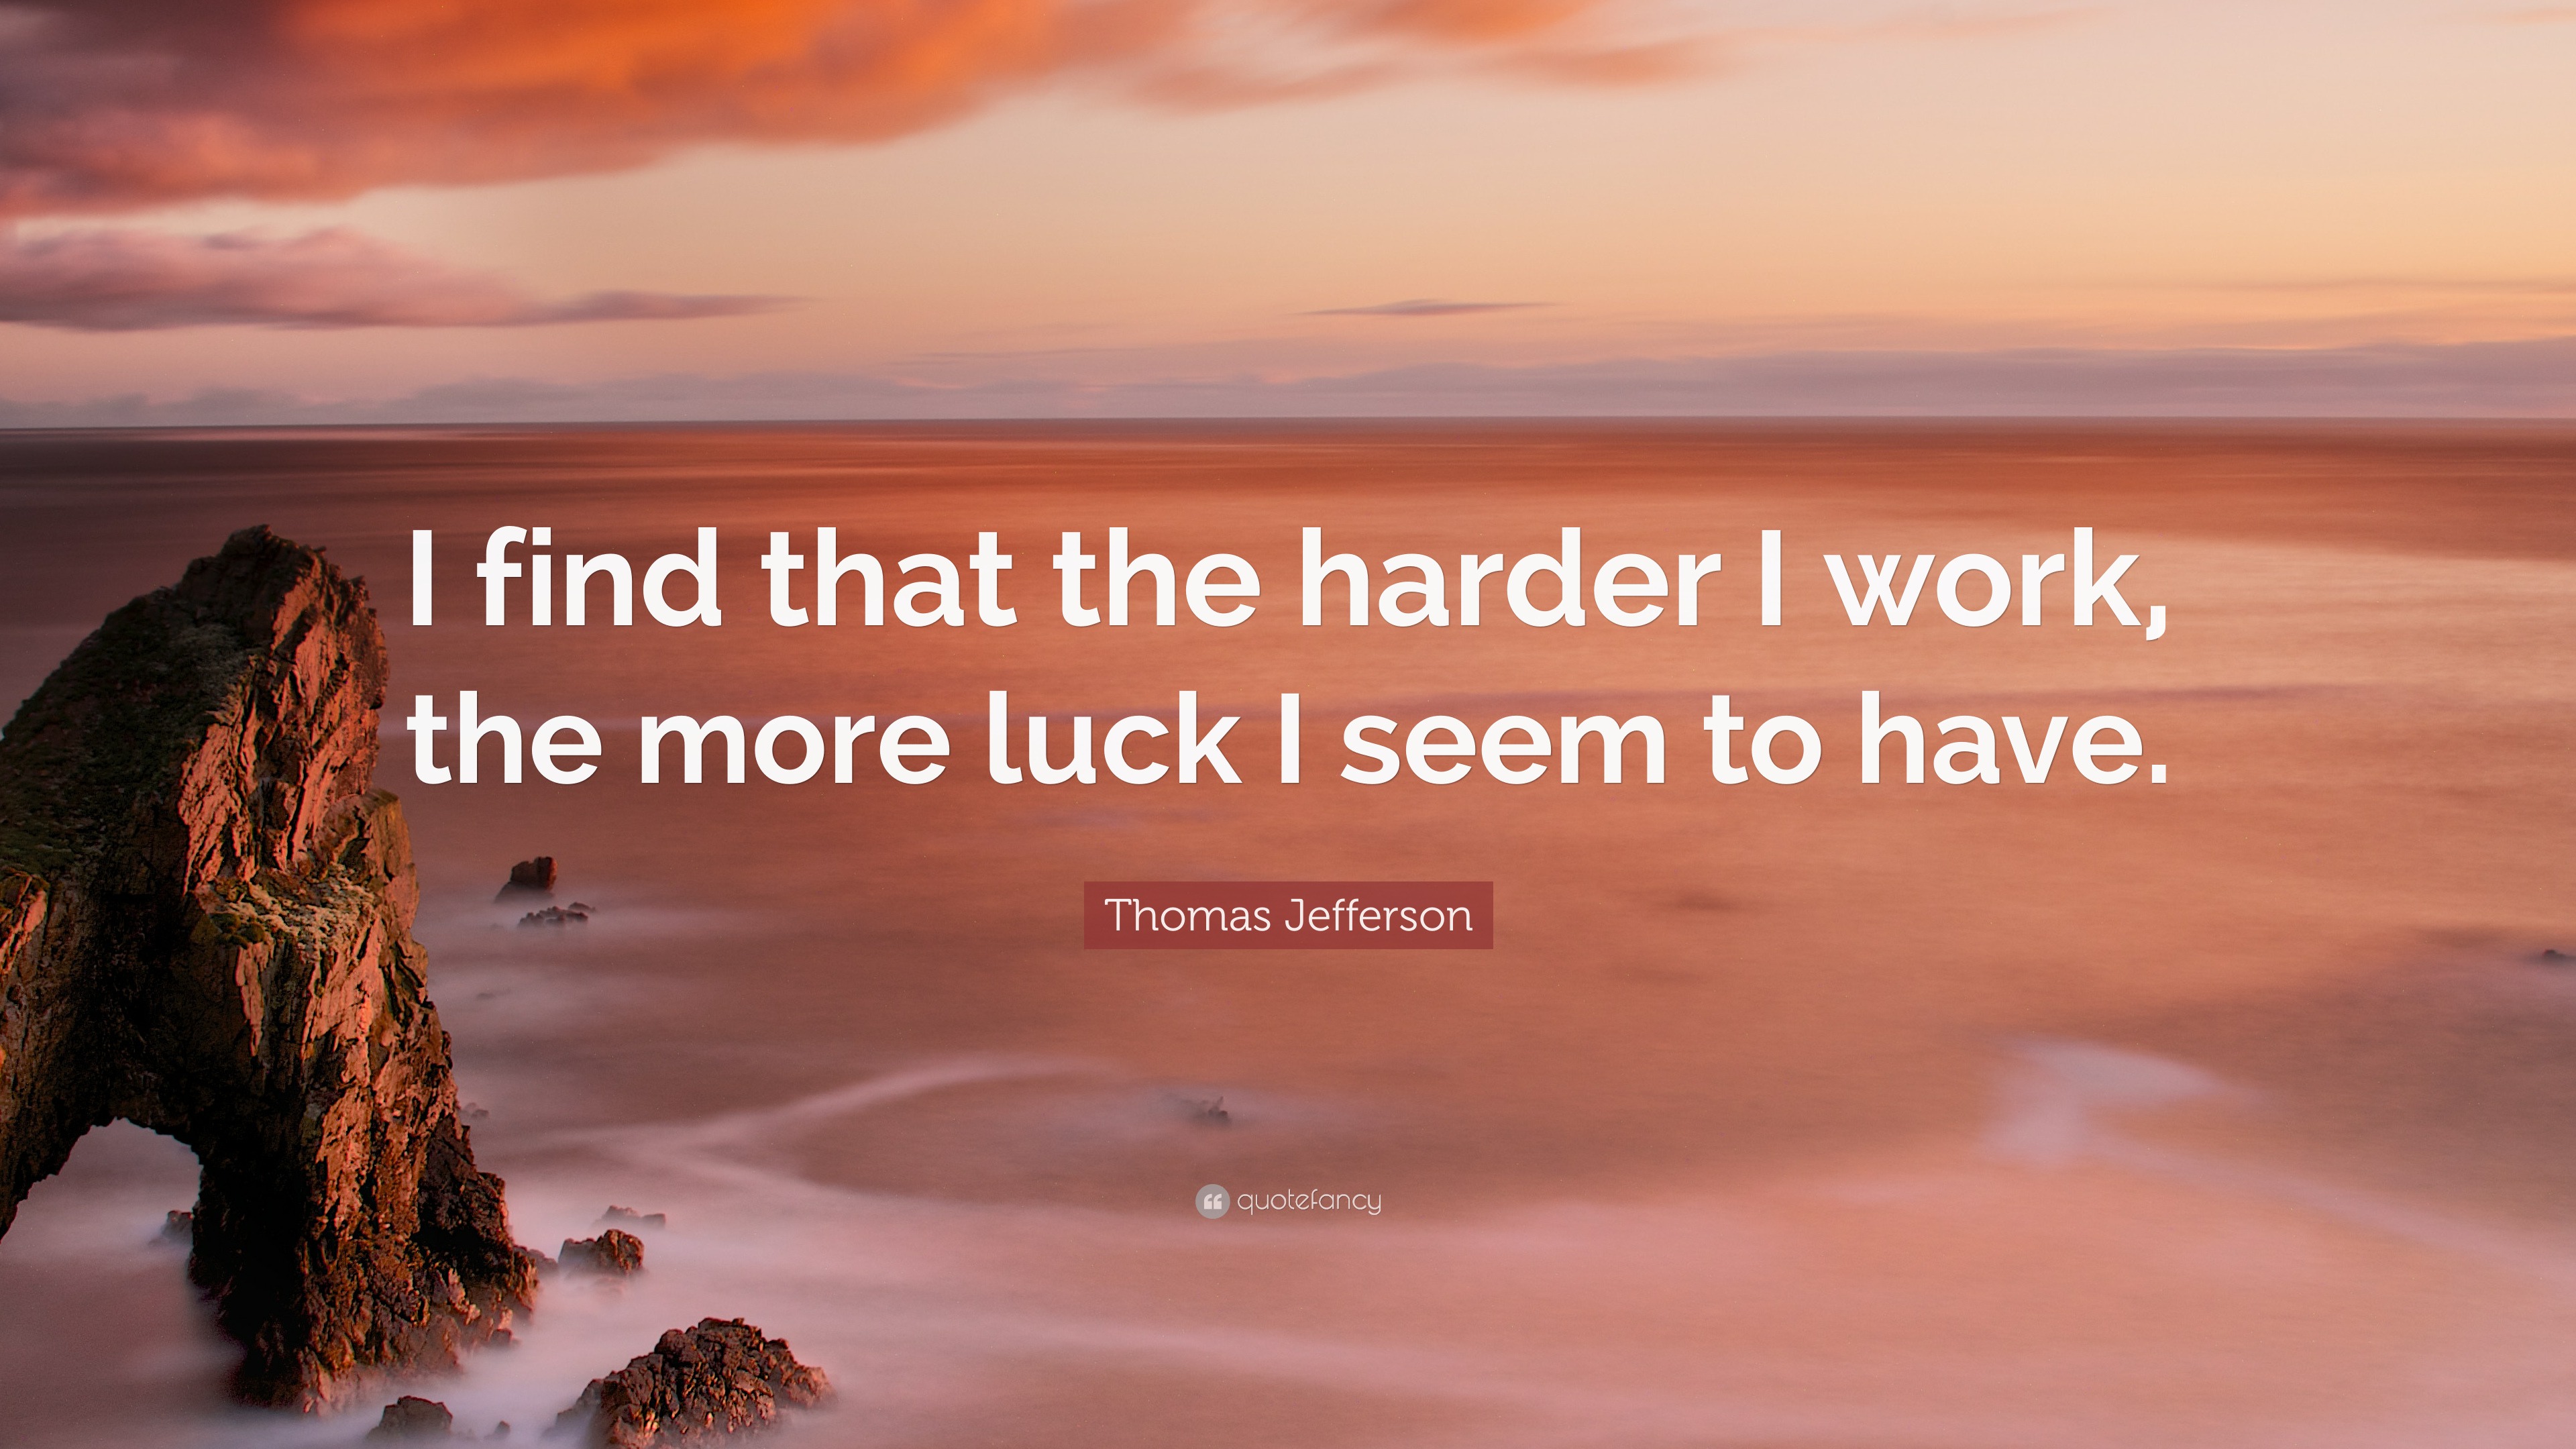 Thomas Jefferson Quote: “I find that the harder I work, the more luck I ...